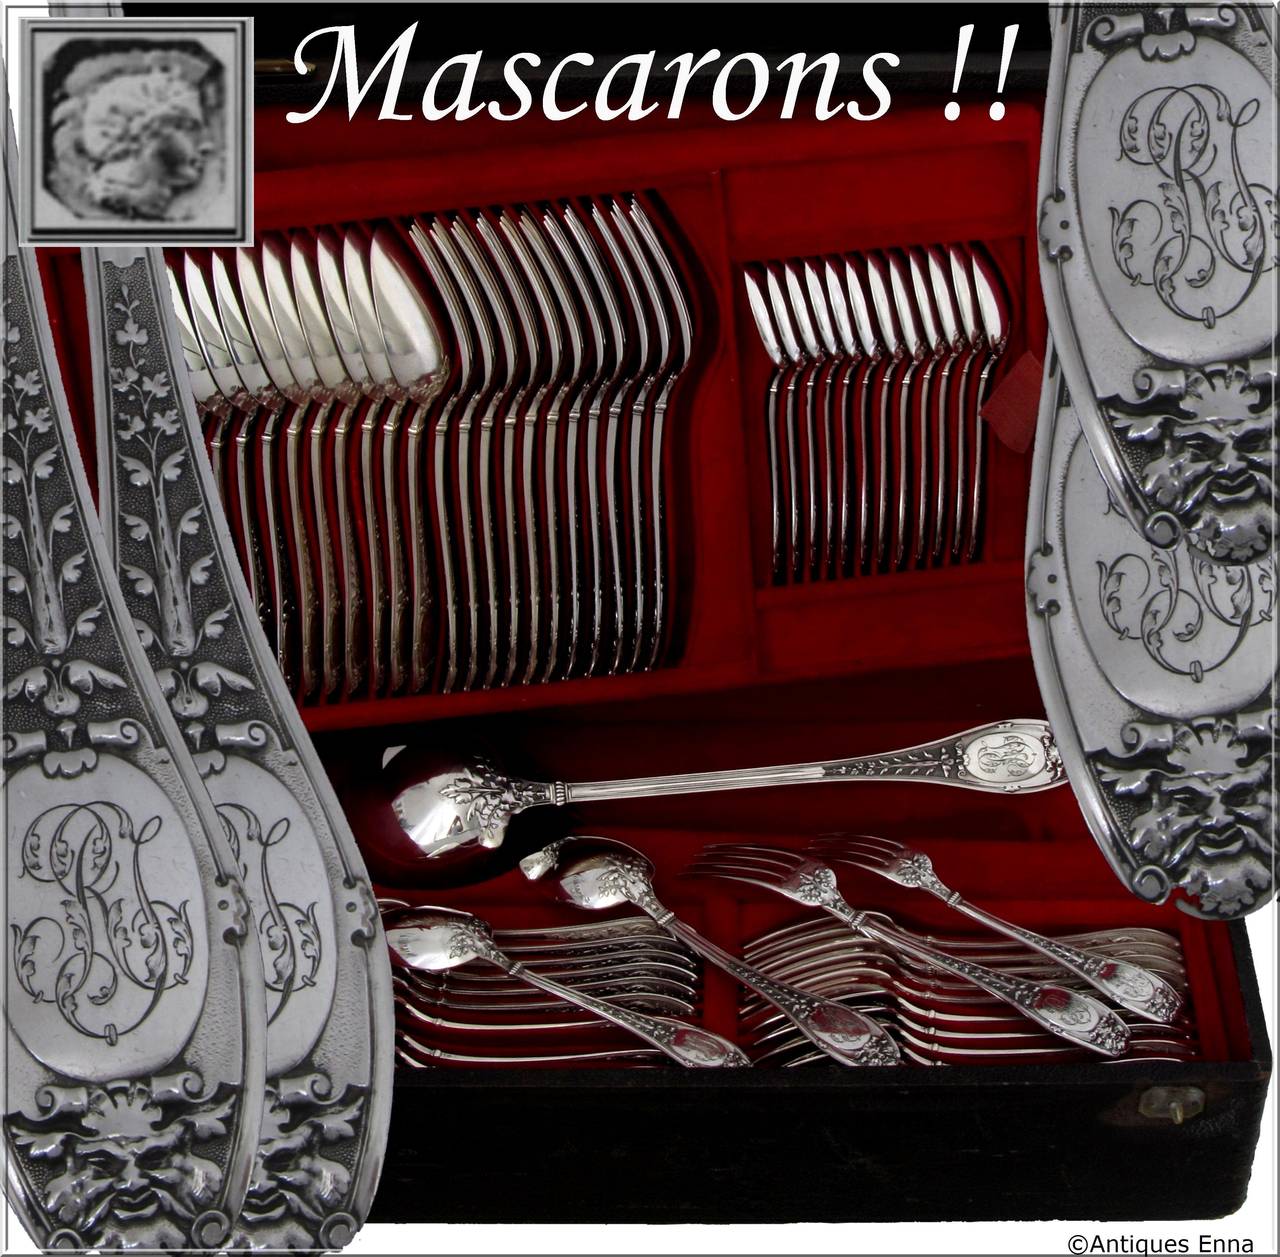 HENIN Incredible French Sterling Silver Flatware Set 61 pc with chest Mascarons

Head of Minerve 1 st titre for 950/1000 French Sterling Silver guarantee

Handles have fantastic decoration in the Renaissance style on a stippled backround on one